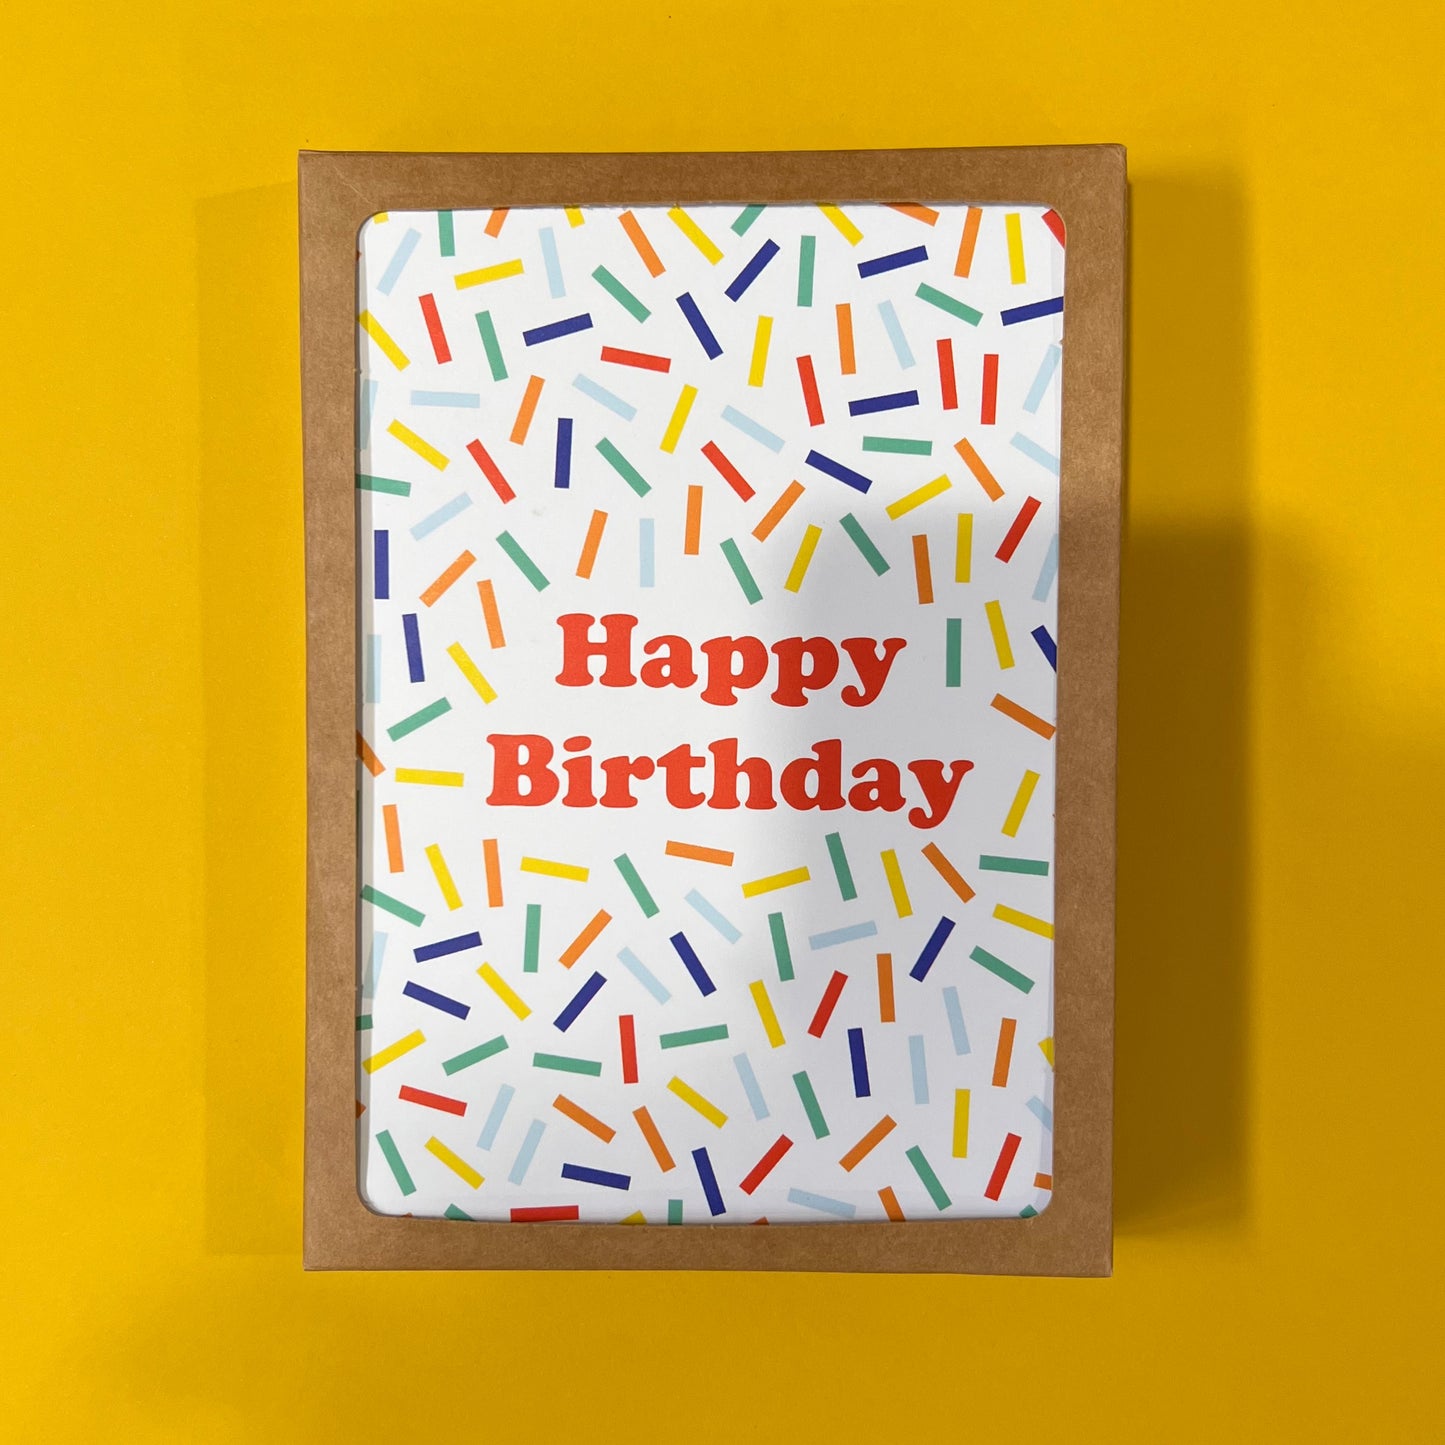 Birthday Confetti 5x7” greeting card from Goods Made By Digitrillnana, Ashley Fletcher. Colorful greeting card. Box of 10.